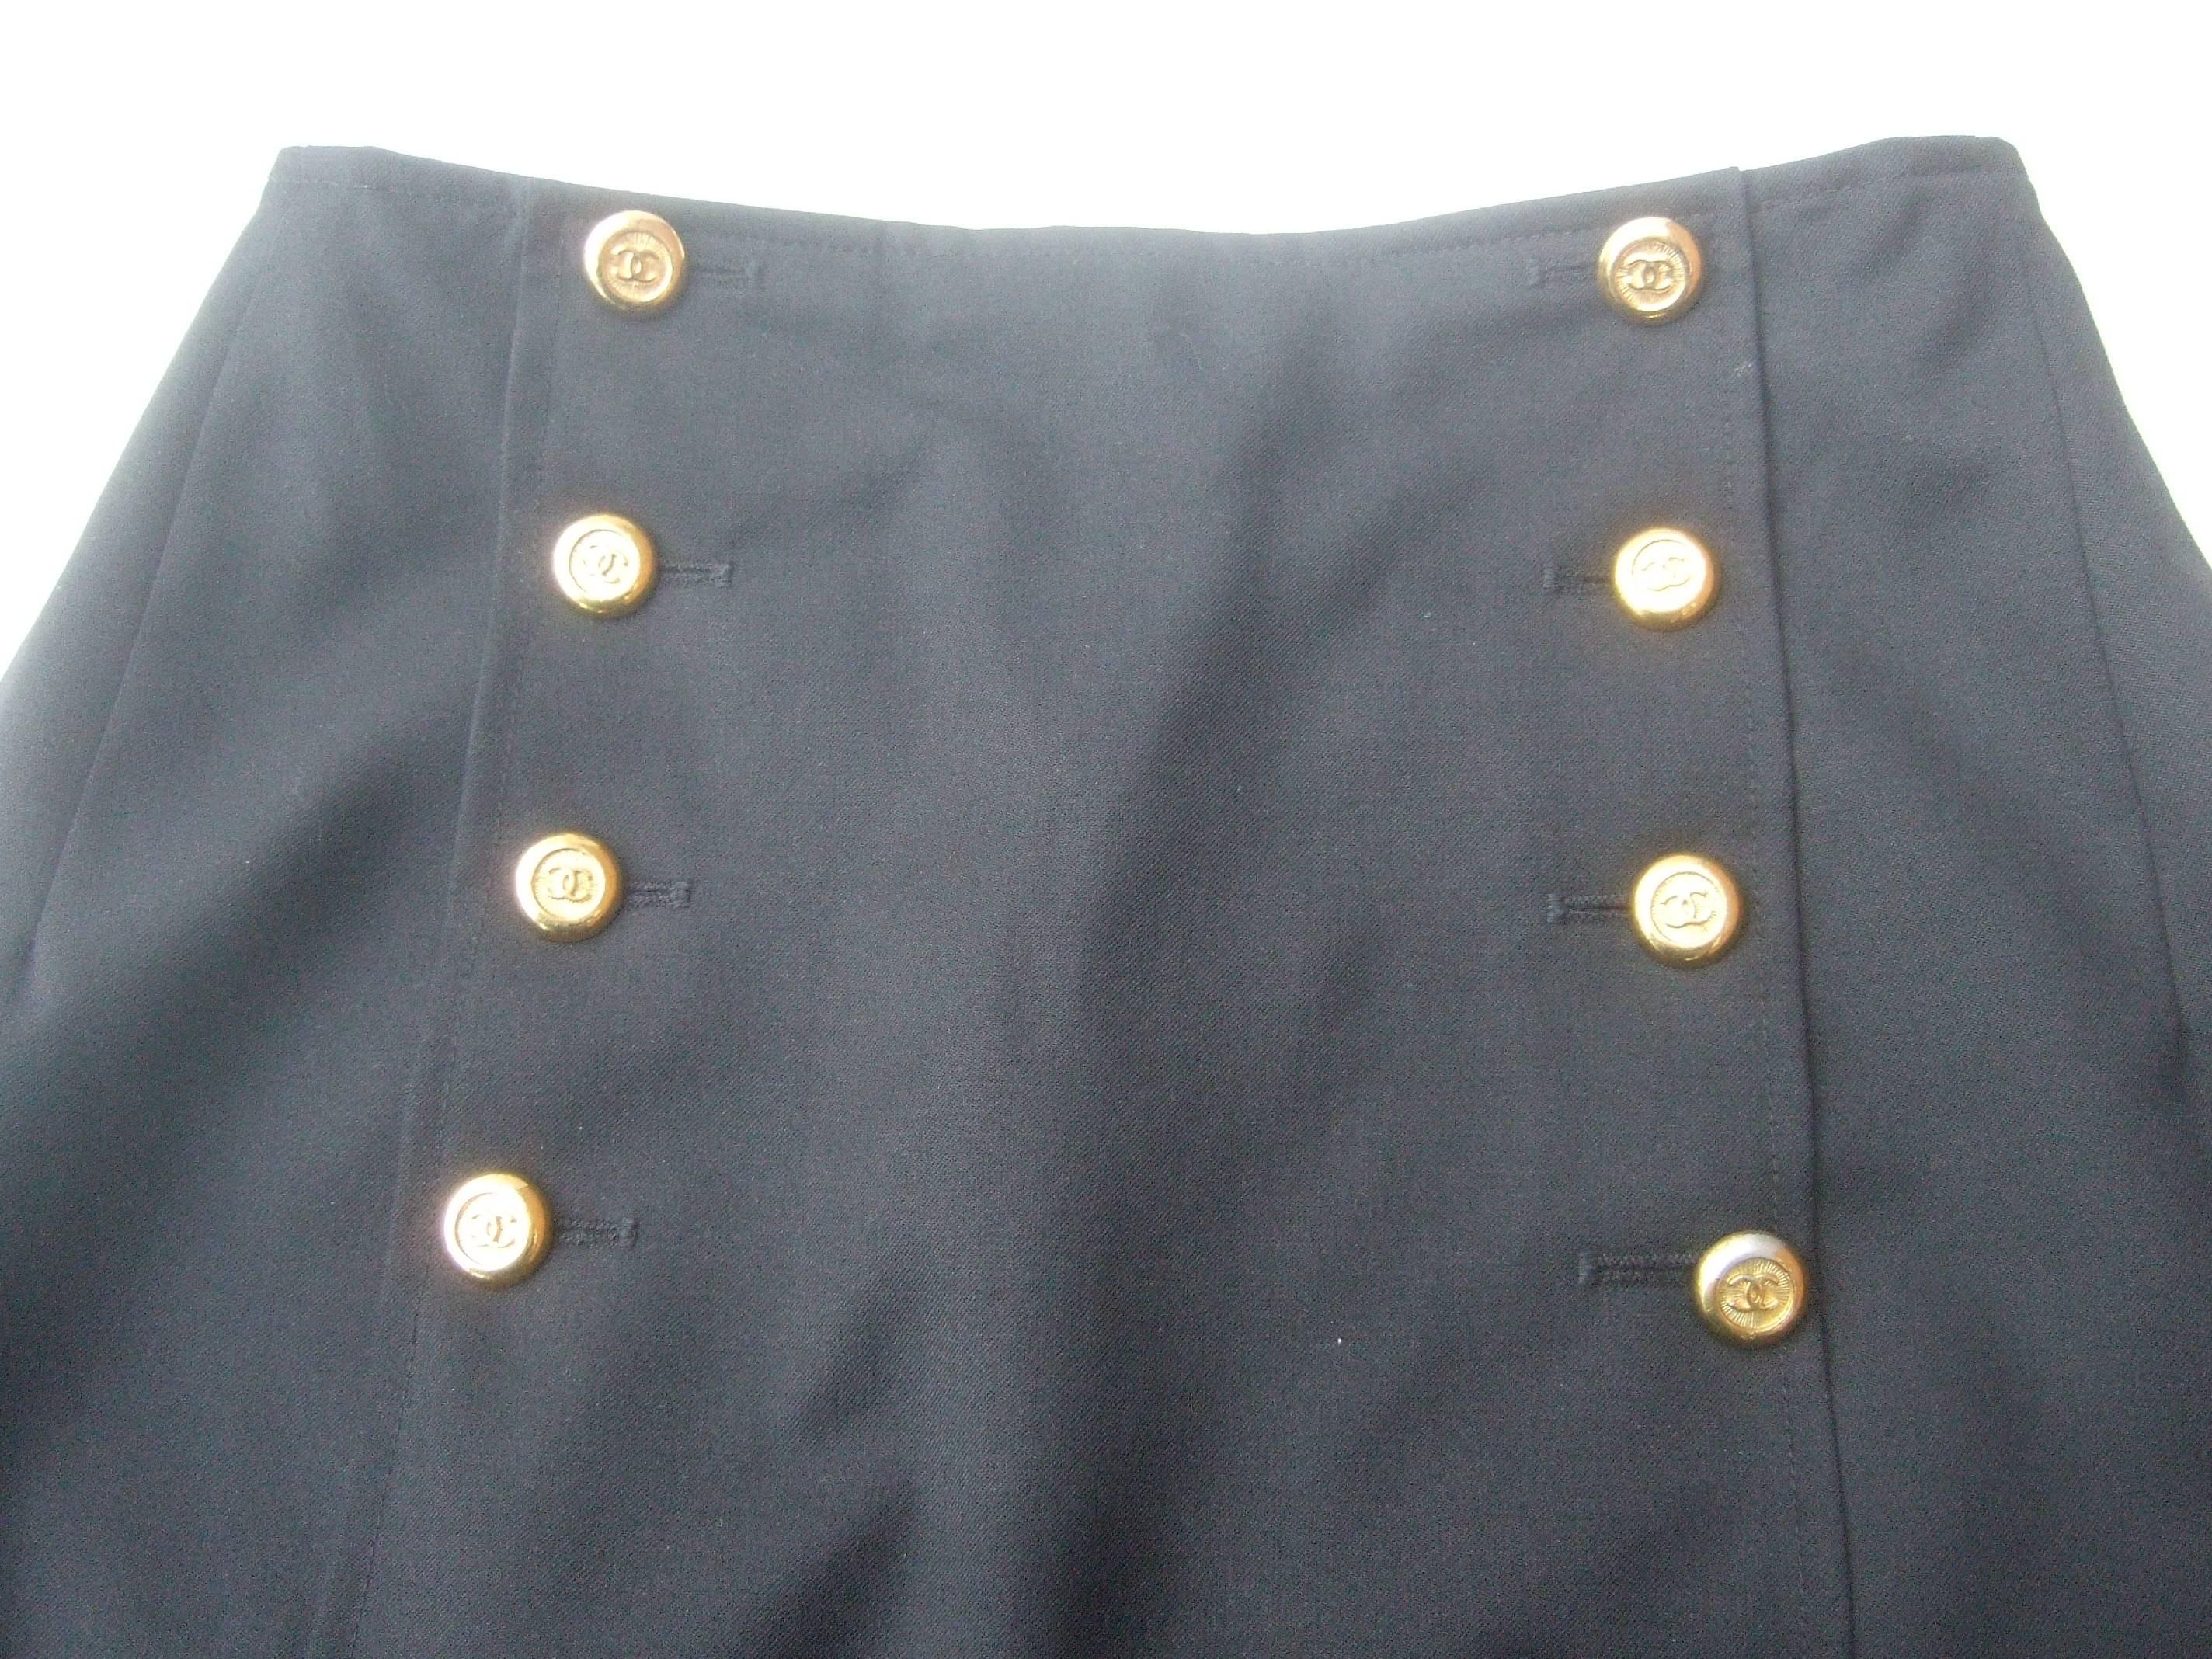 Chanel Boutique Dark Blue Wool Pencil Skirt with Chanel Buttons c 1990s 2